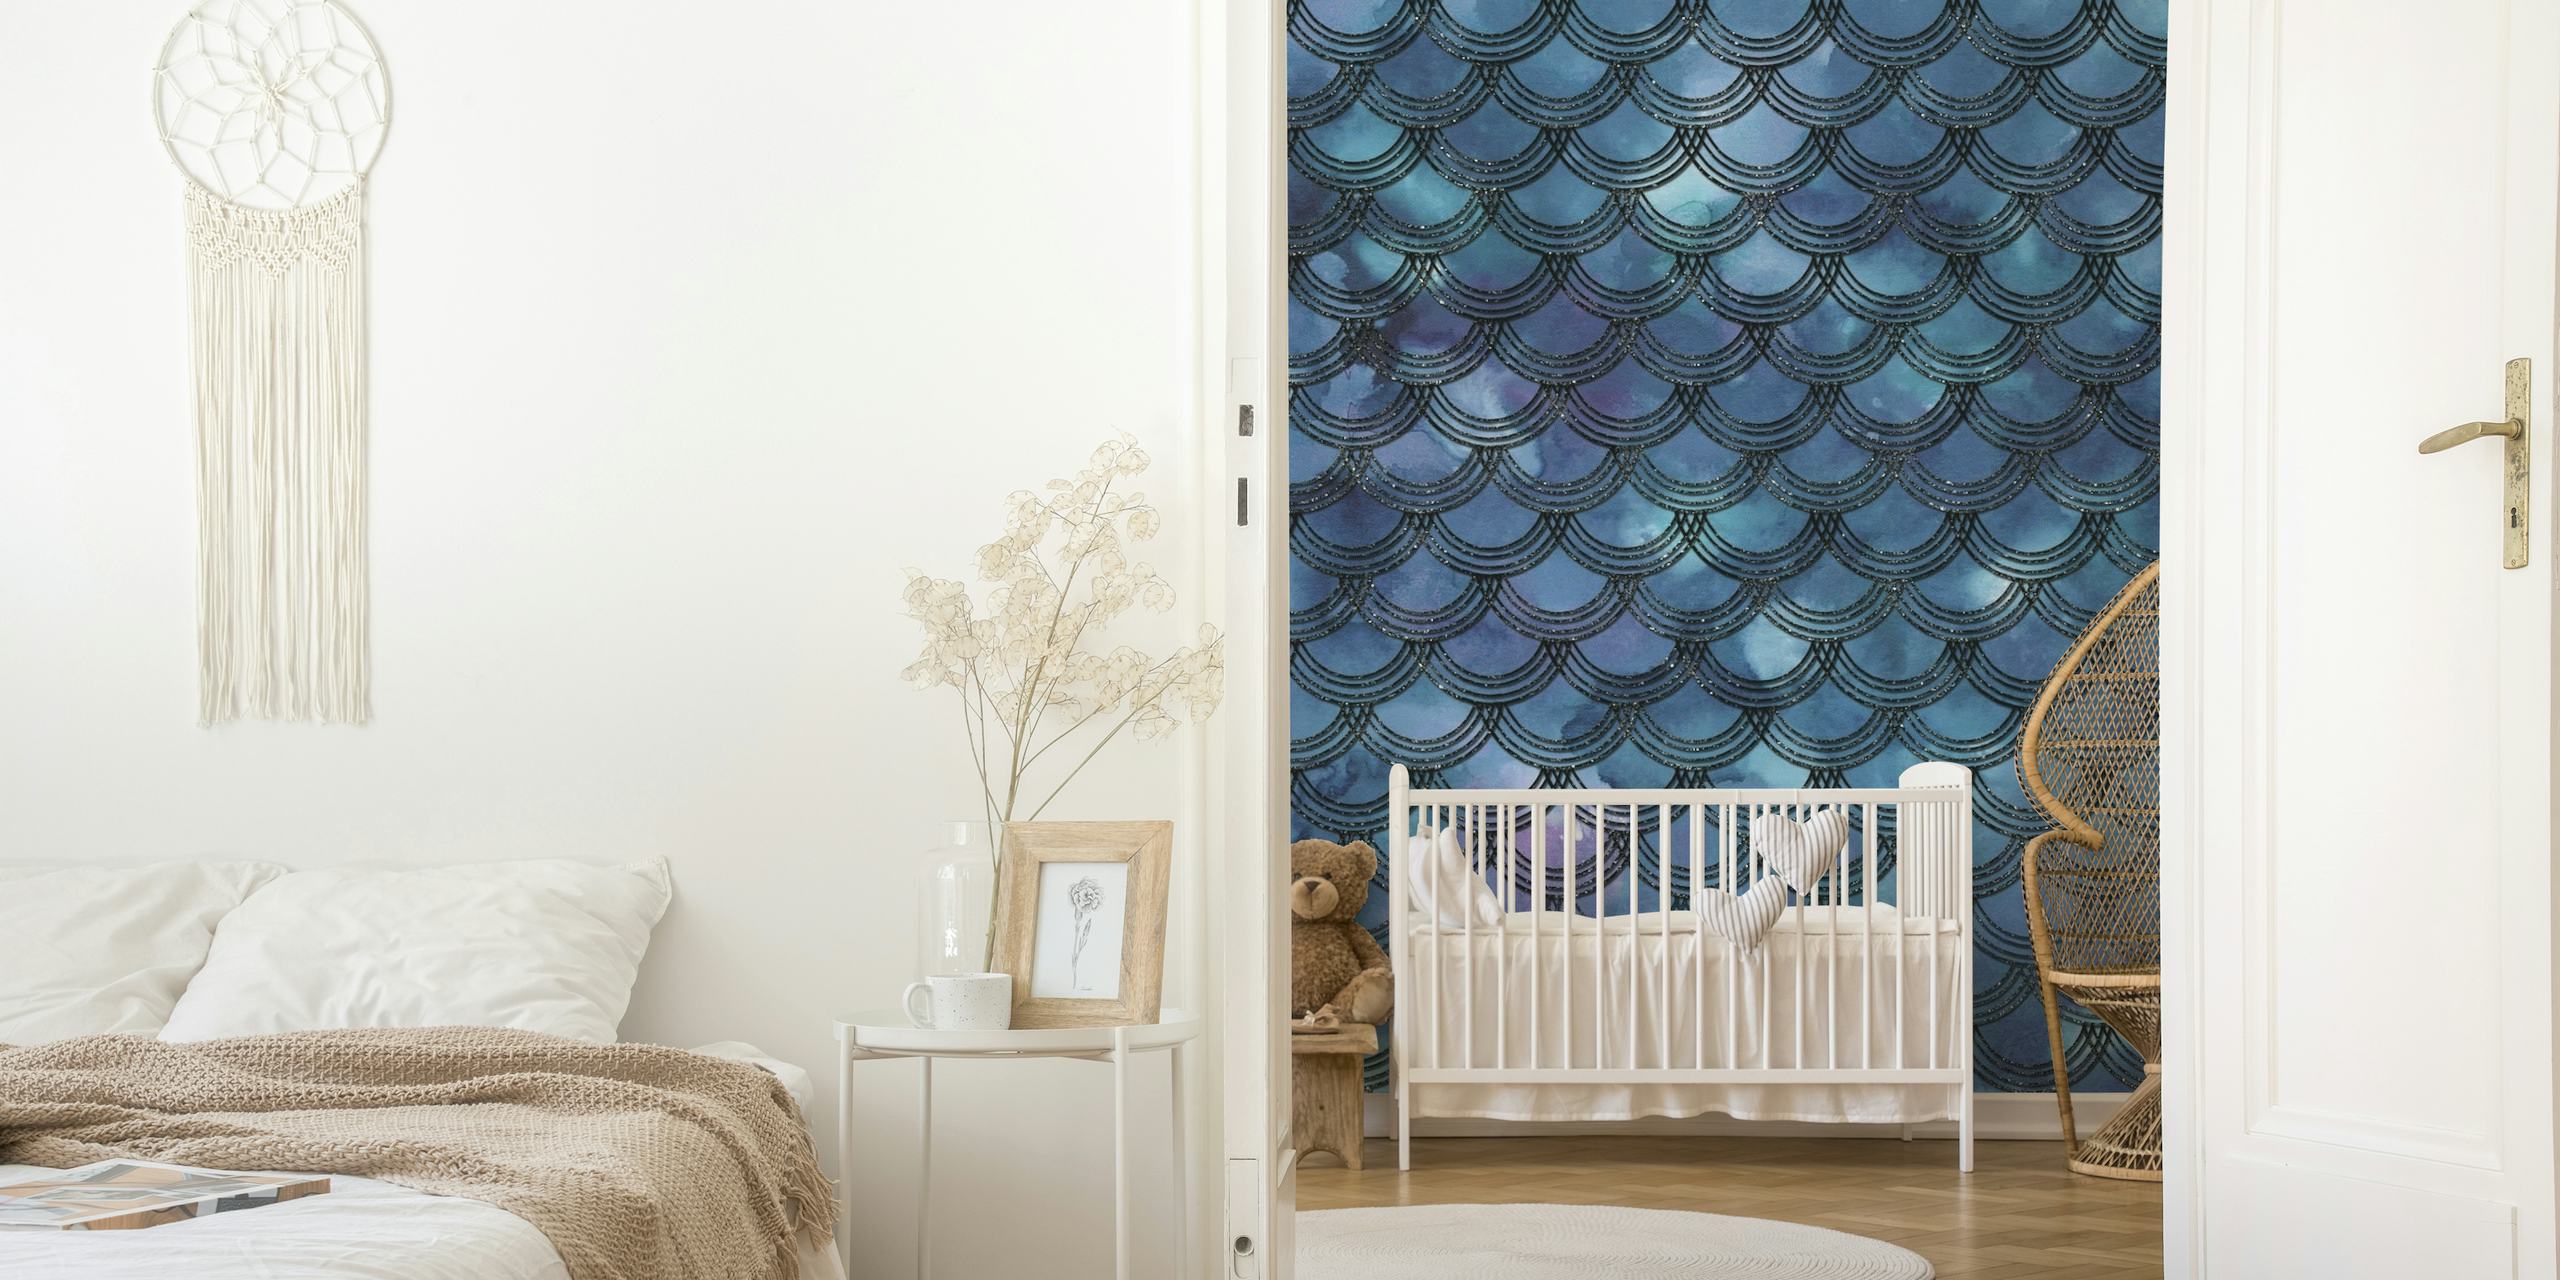 Fantasy-inspired mermaid scales wall mural in purple and blue shades